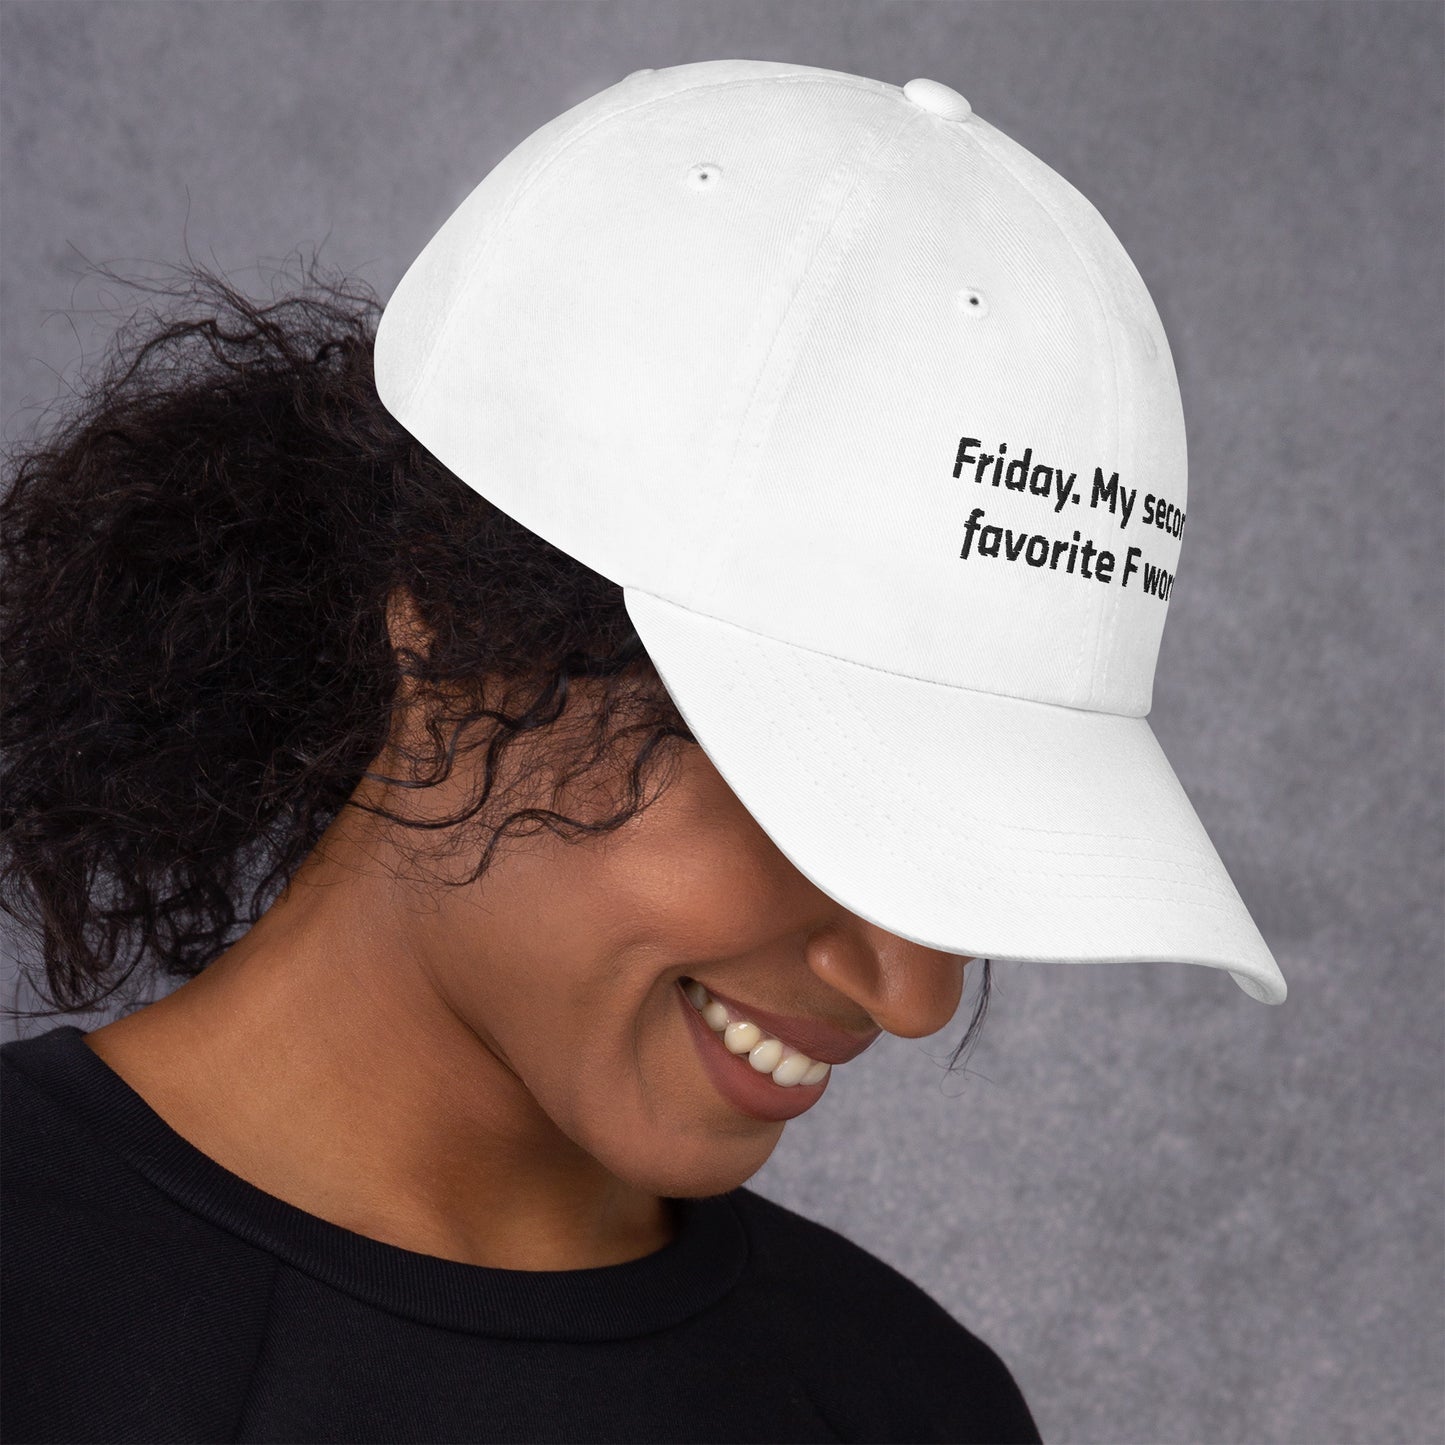 Friday, my second favorite F word Dad hat